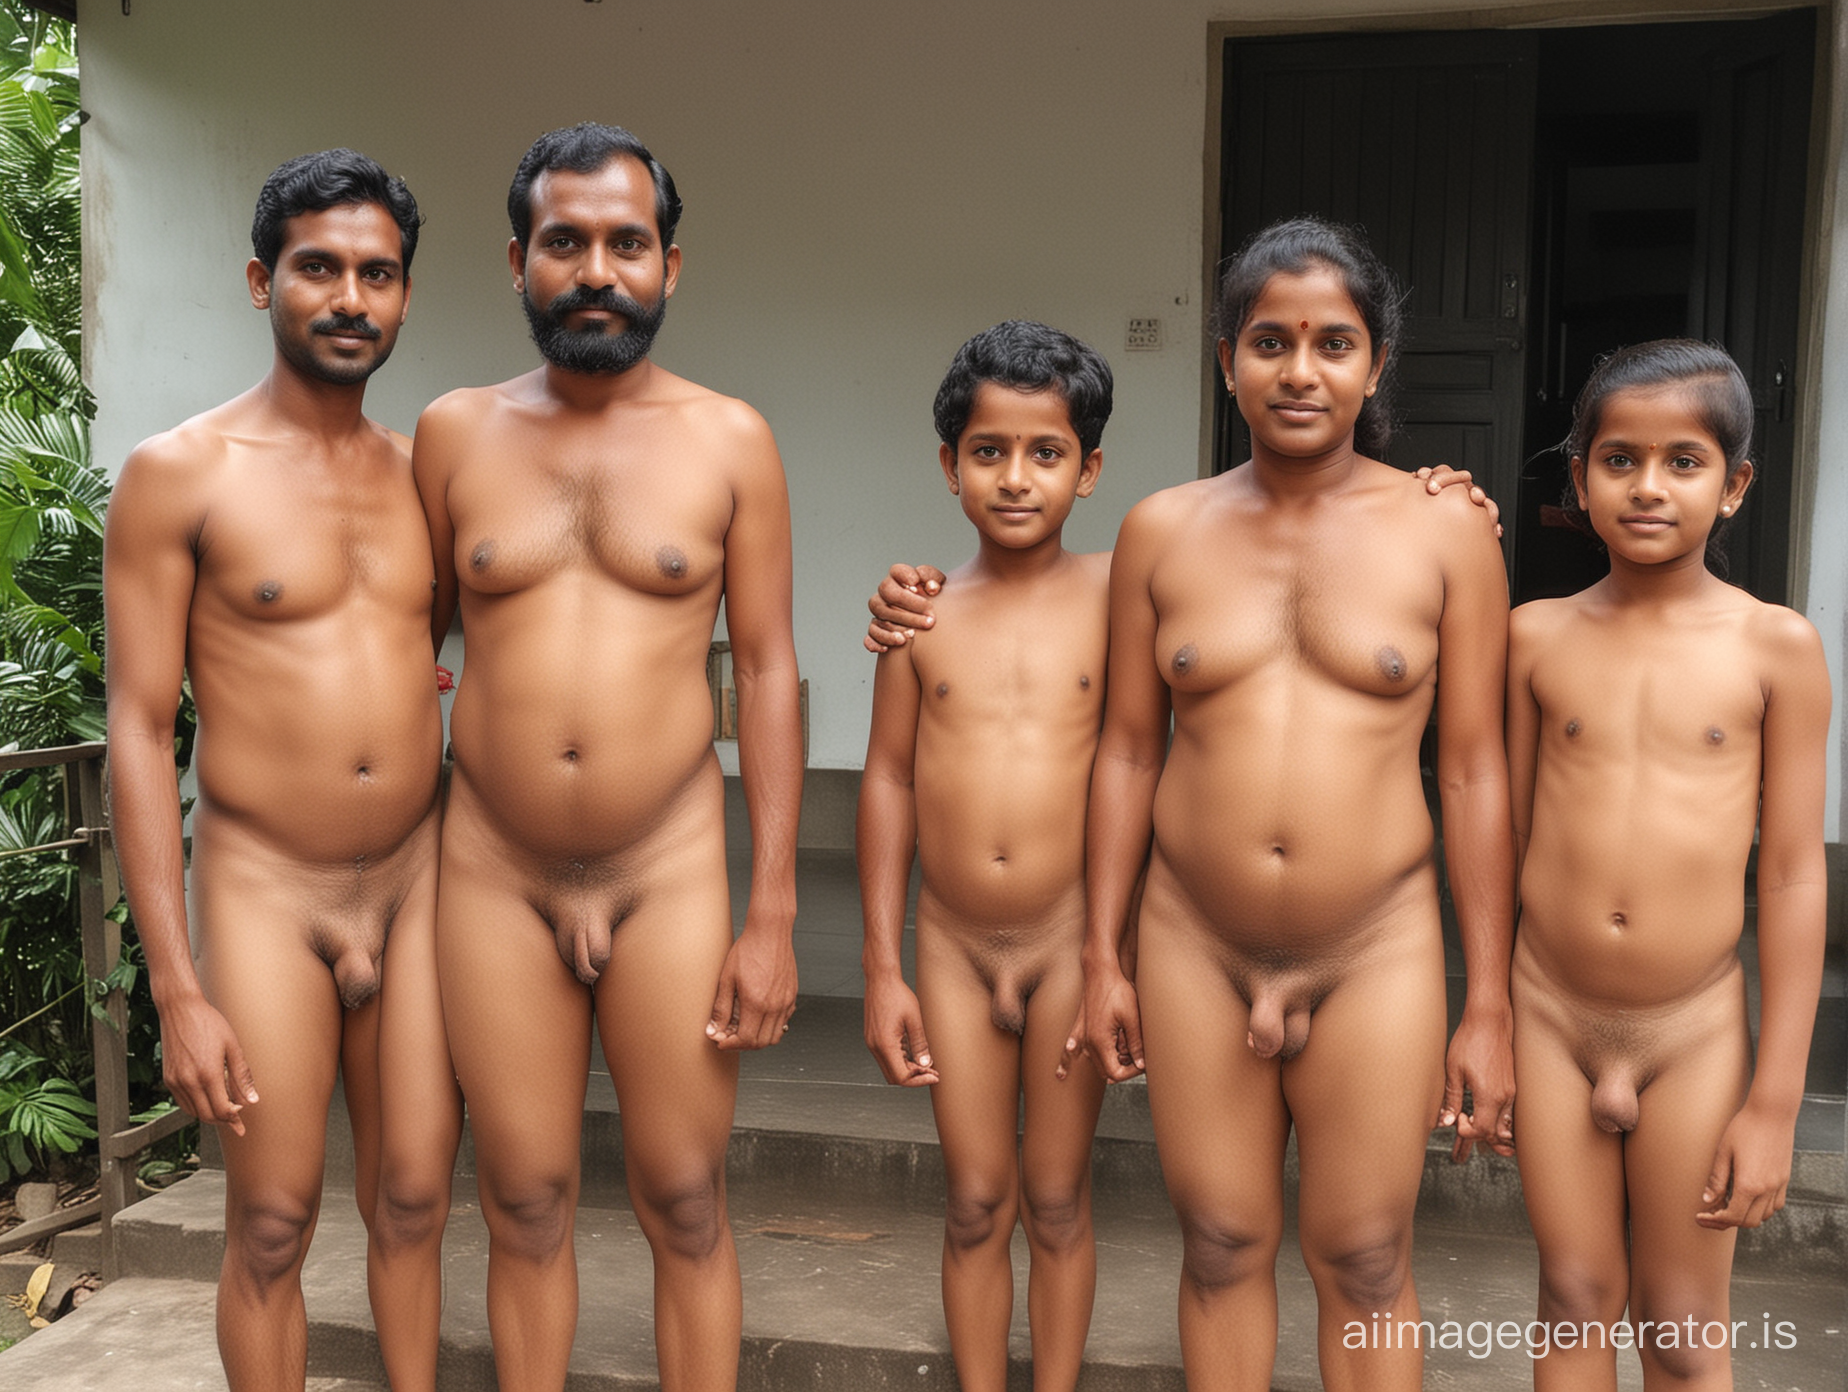 Nude Kerala father, mother and 3 young children in terrace